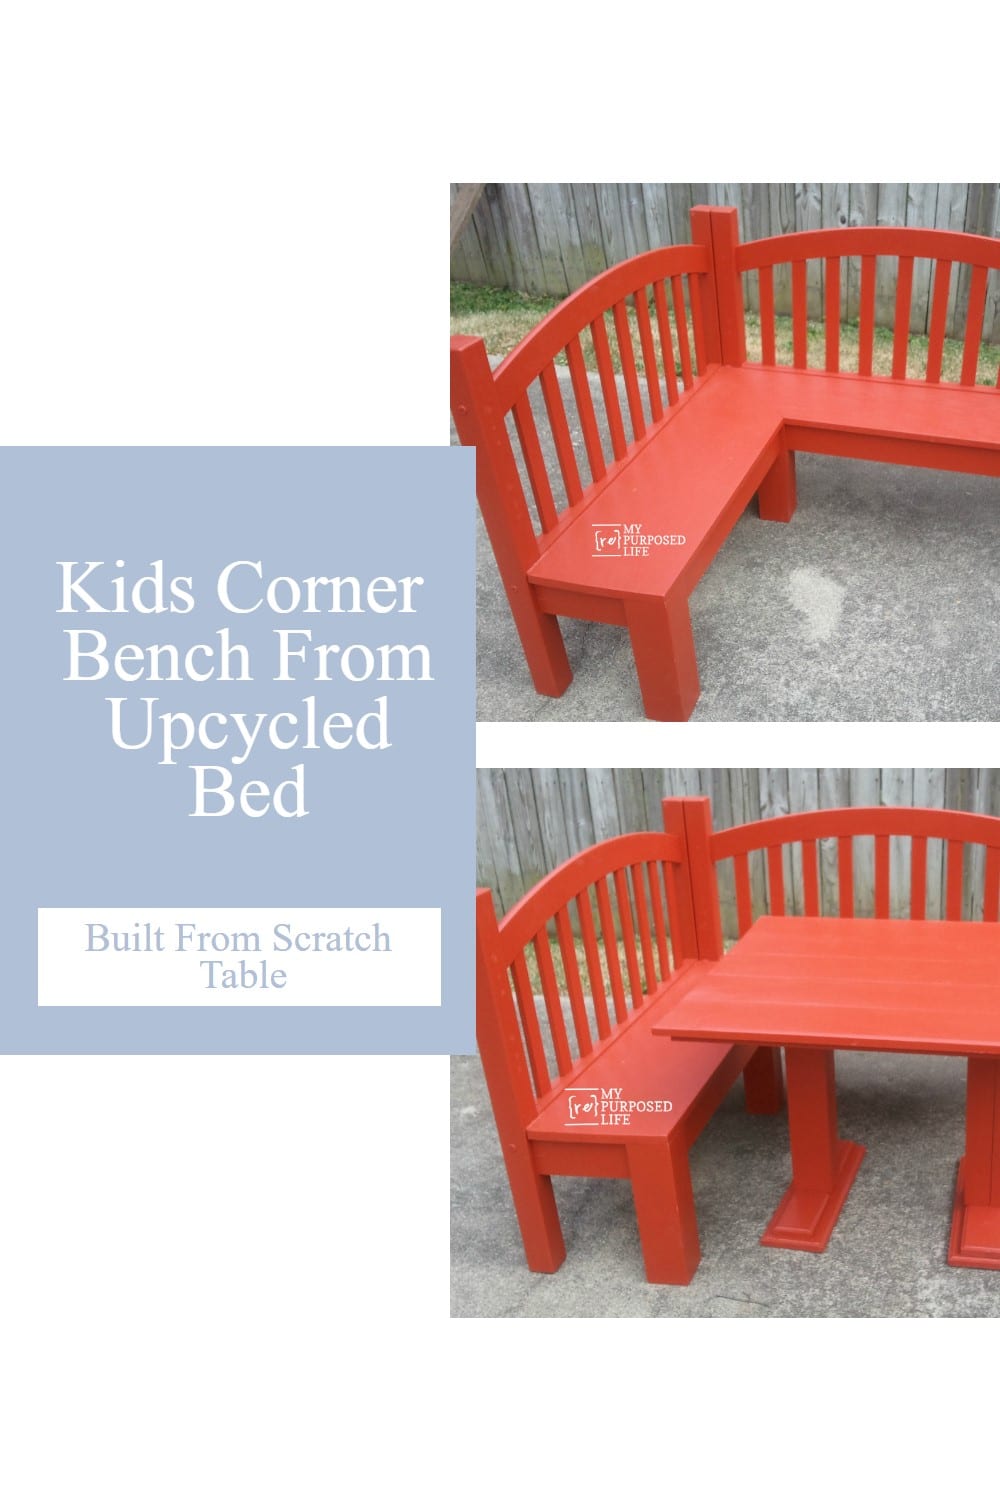 How to make a kid friendly corner table bench out of two daybed pieces. Step by step instructions will show you how to make your very own corner bench. #MyRepurposedLife #repurposed #cornerbench #headboard via @repurposedlife